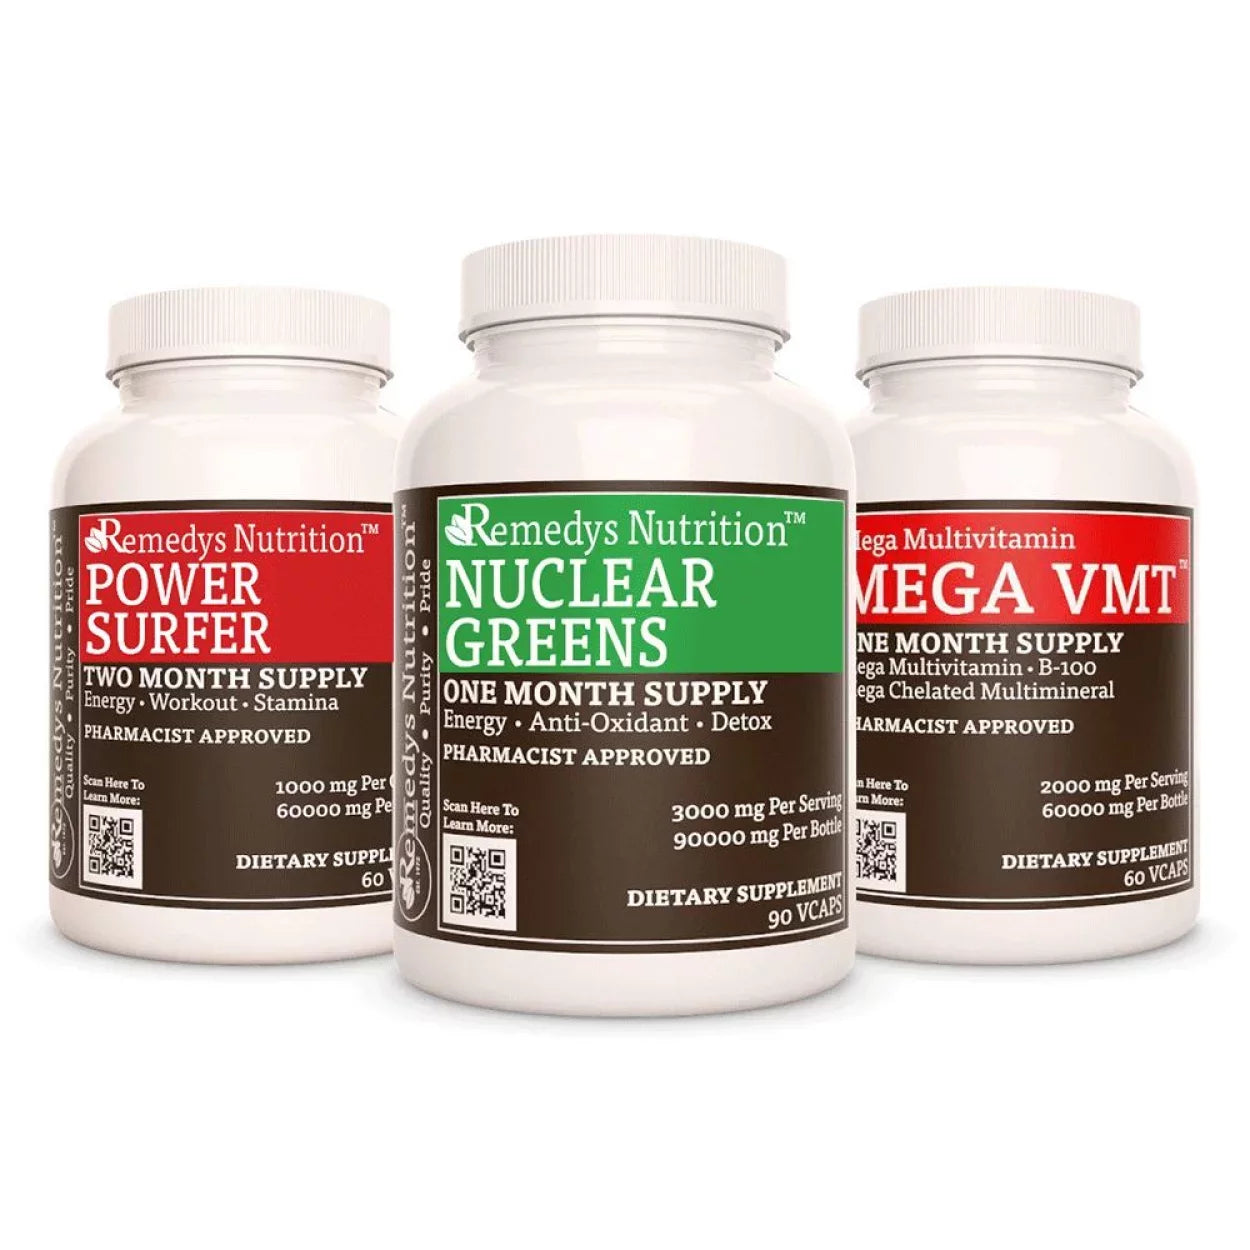 Image of Remedy's Nutrition® Fatigue Power Pack™ Dietary Supplement bottles. Contains Nuclear Greens™ Power Surfer™ Mega VMT™